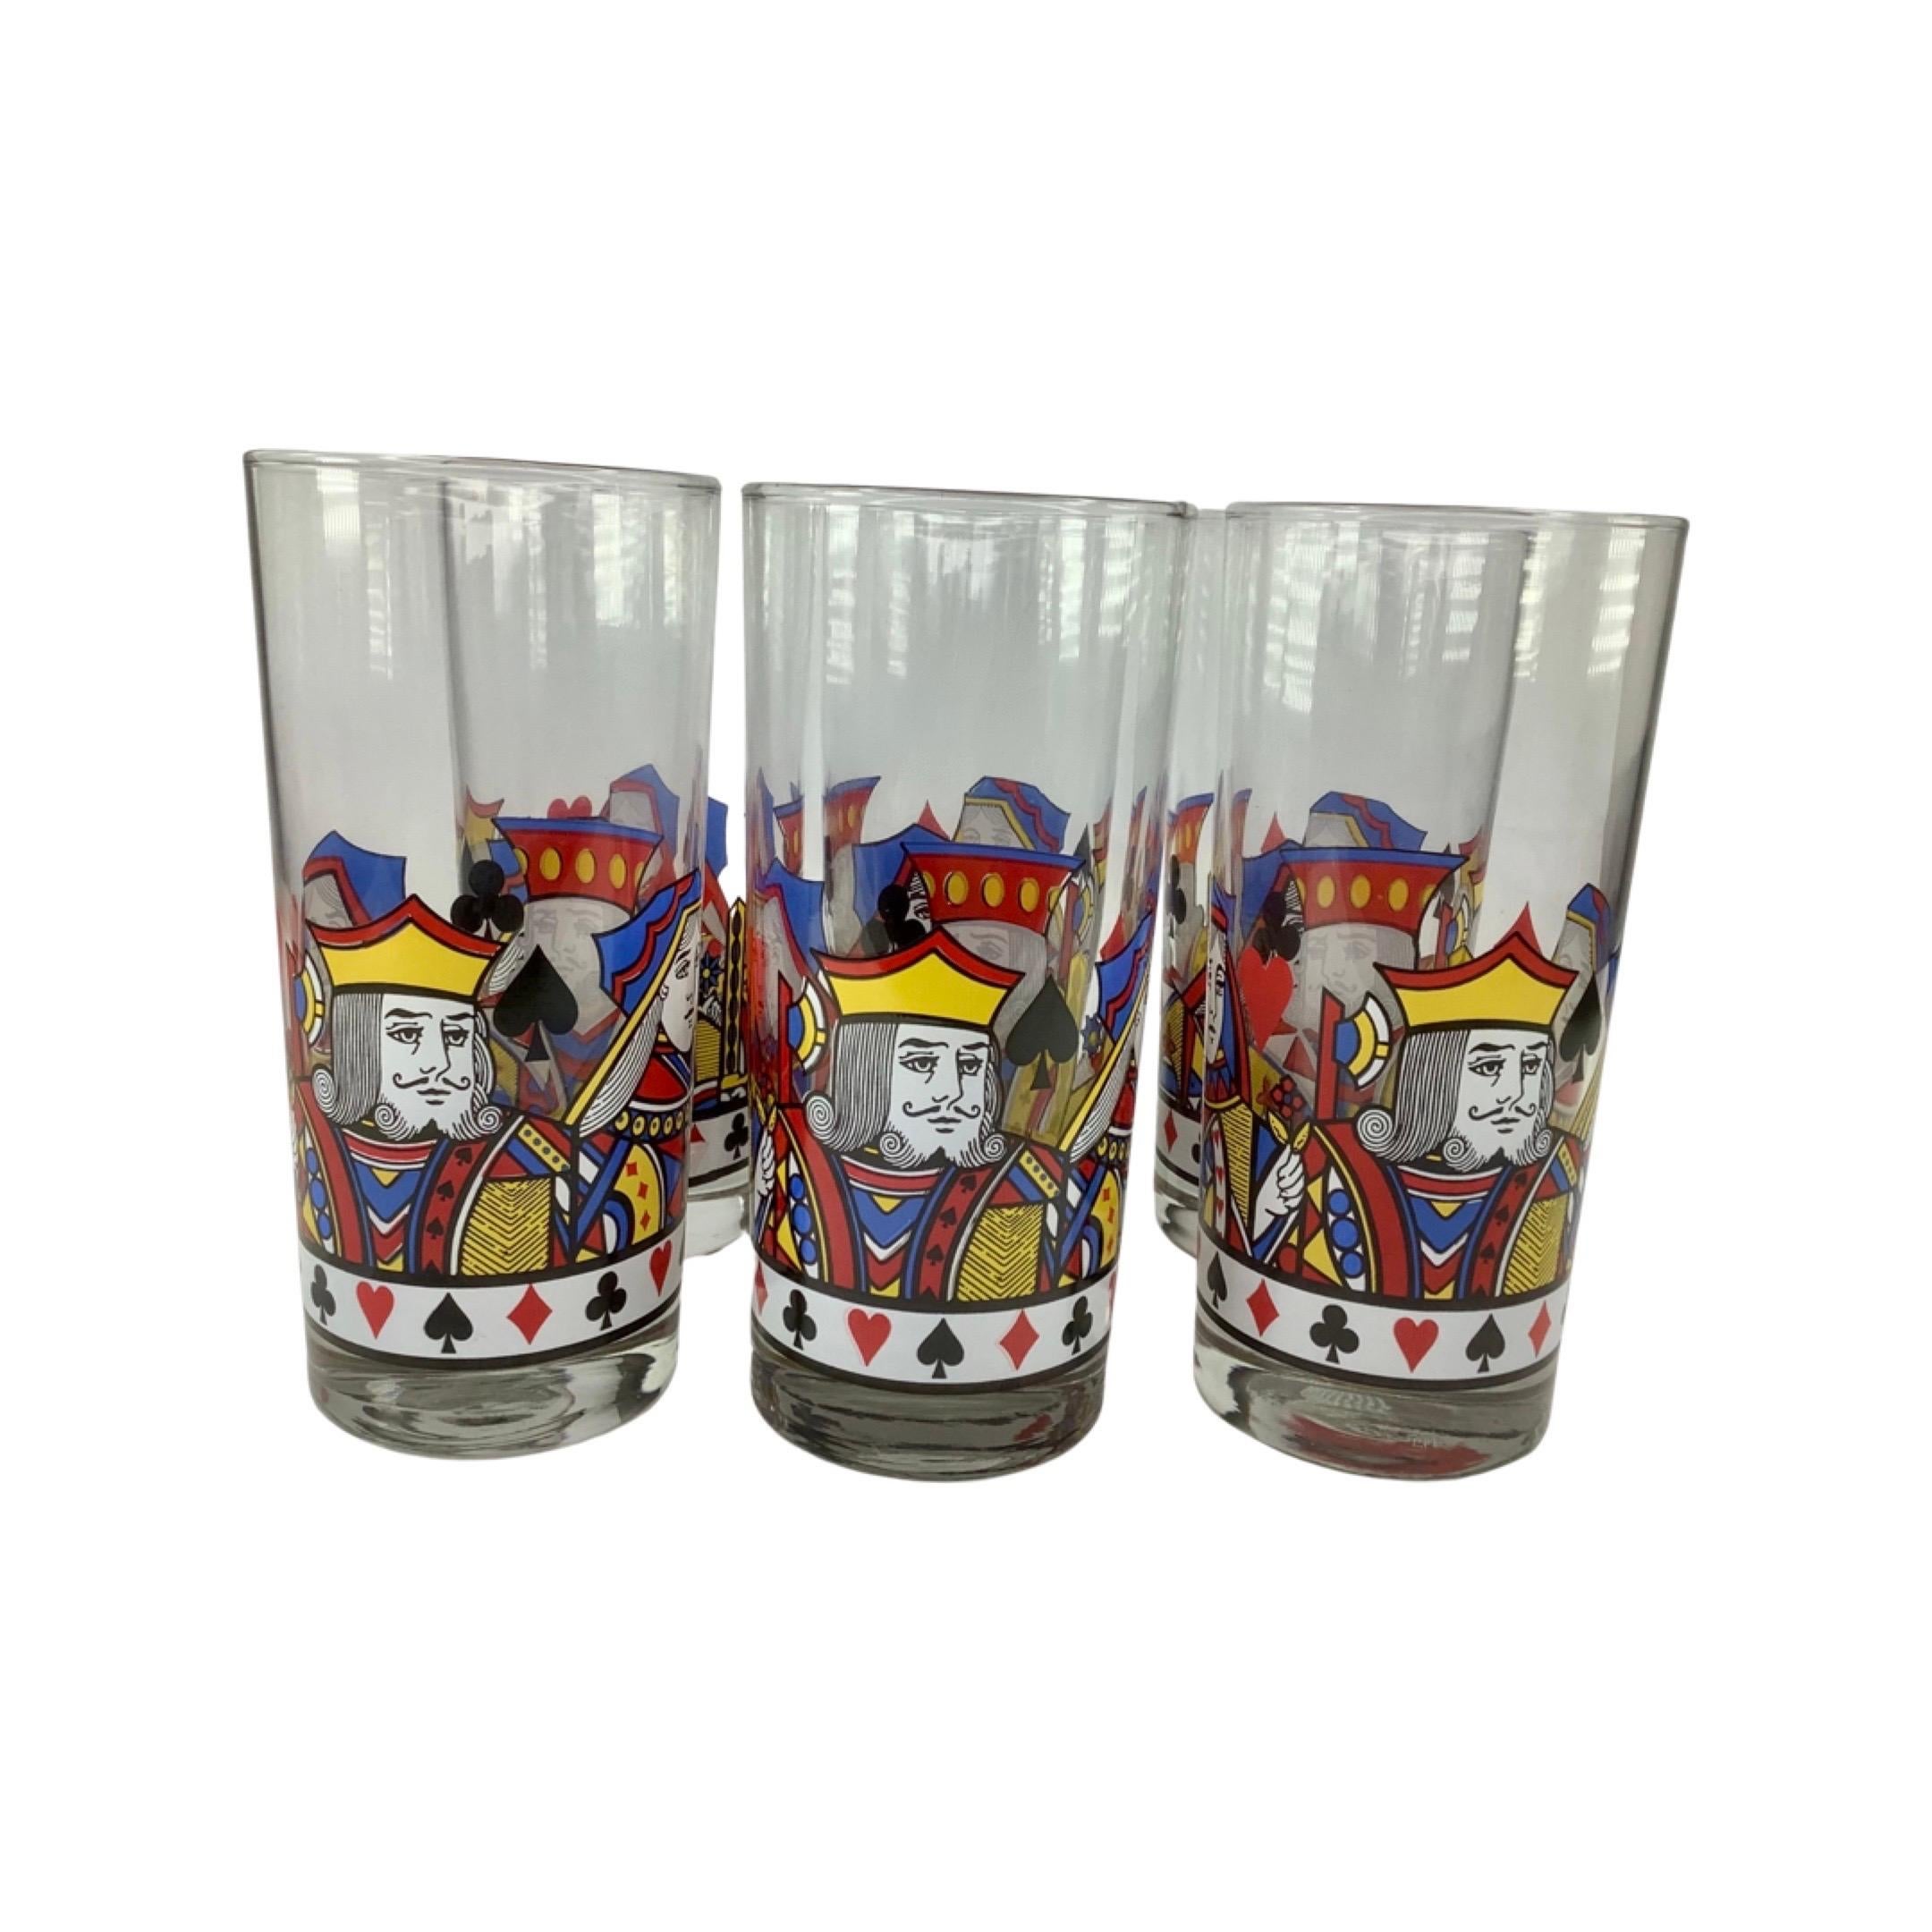 Set of 6 Vintage Card Suit Highball Glasses. Each glass with colorful enameled decoration of heads of kings and queens. A white band with enameled heart, spade, diamond and club finish the decoration on the glass. All in excellent vintage condition.